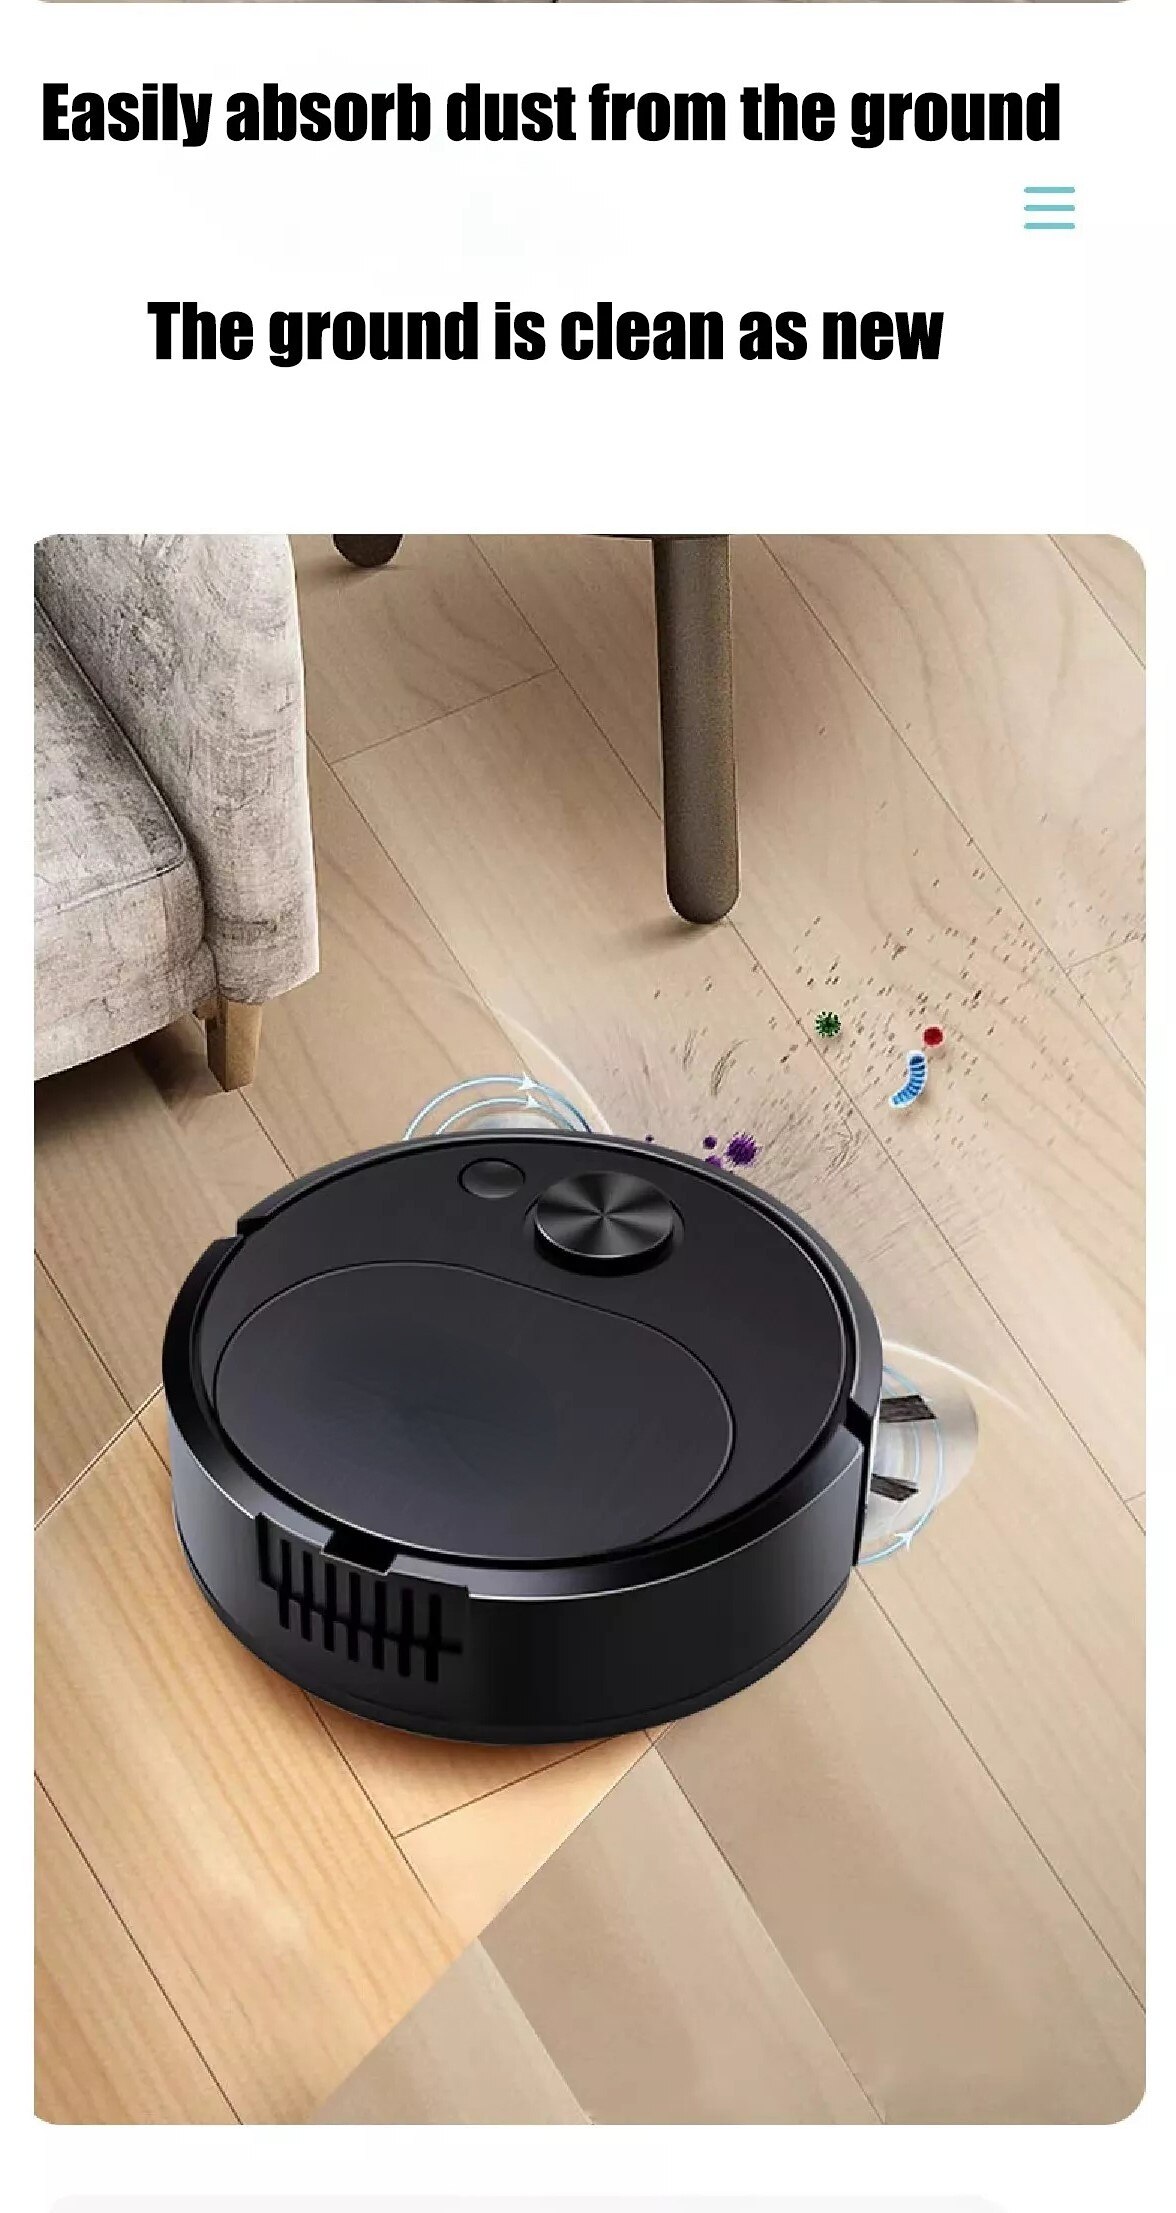 Smart Sweeping Robot Cleaning Suction Sweeping Mopping 3 in 1 Automatic Household Rechargeable Mini Vacuum Cleaner